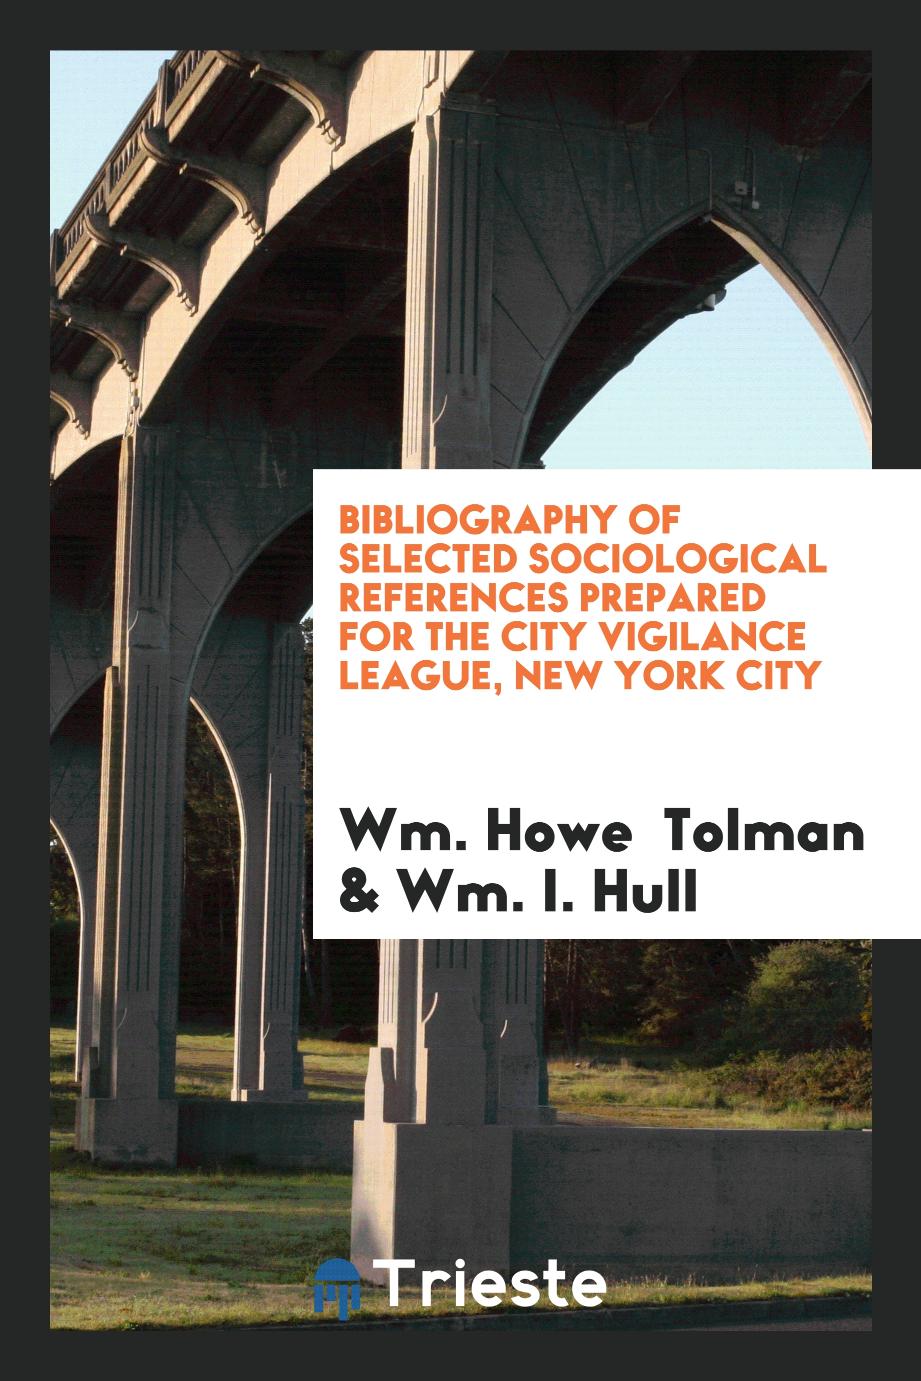 Bibliography of Selected Sociological References Prepared for the City Vigilance League, New York City